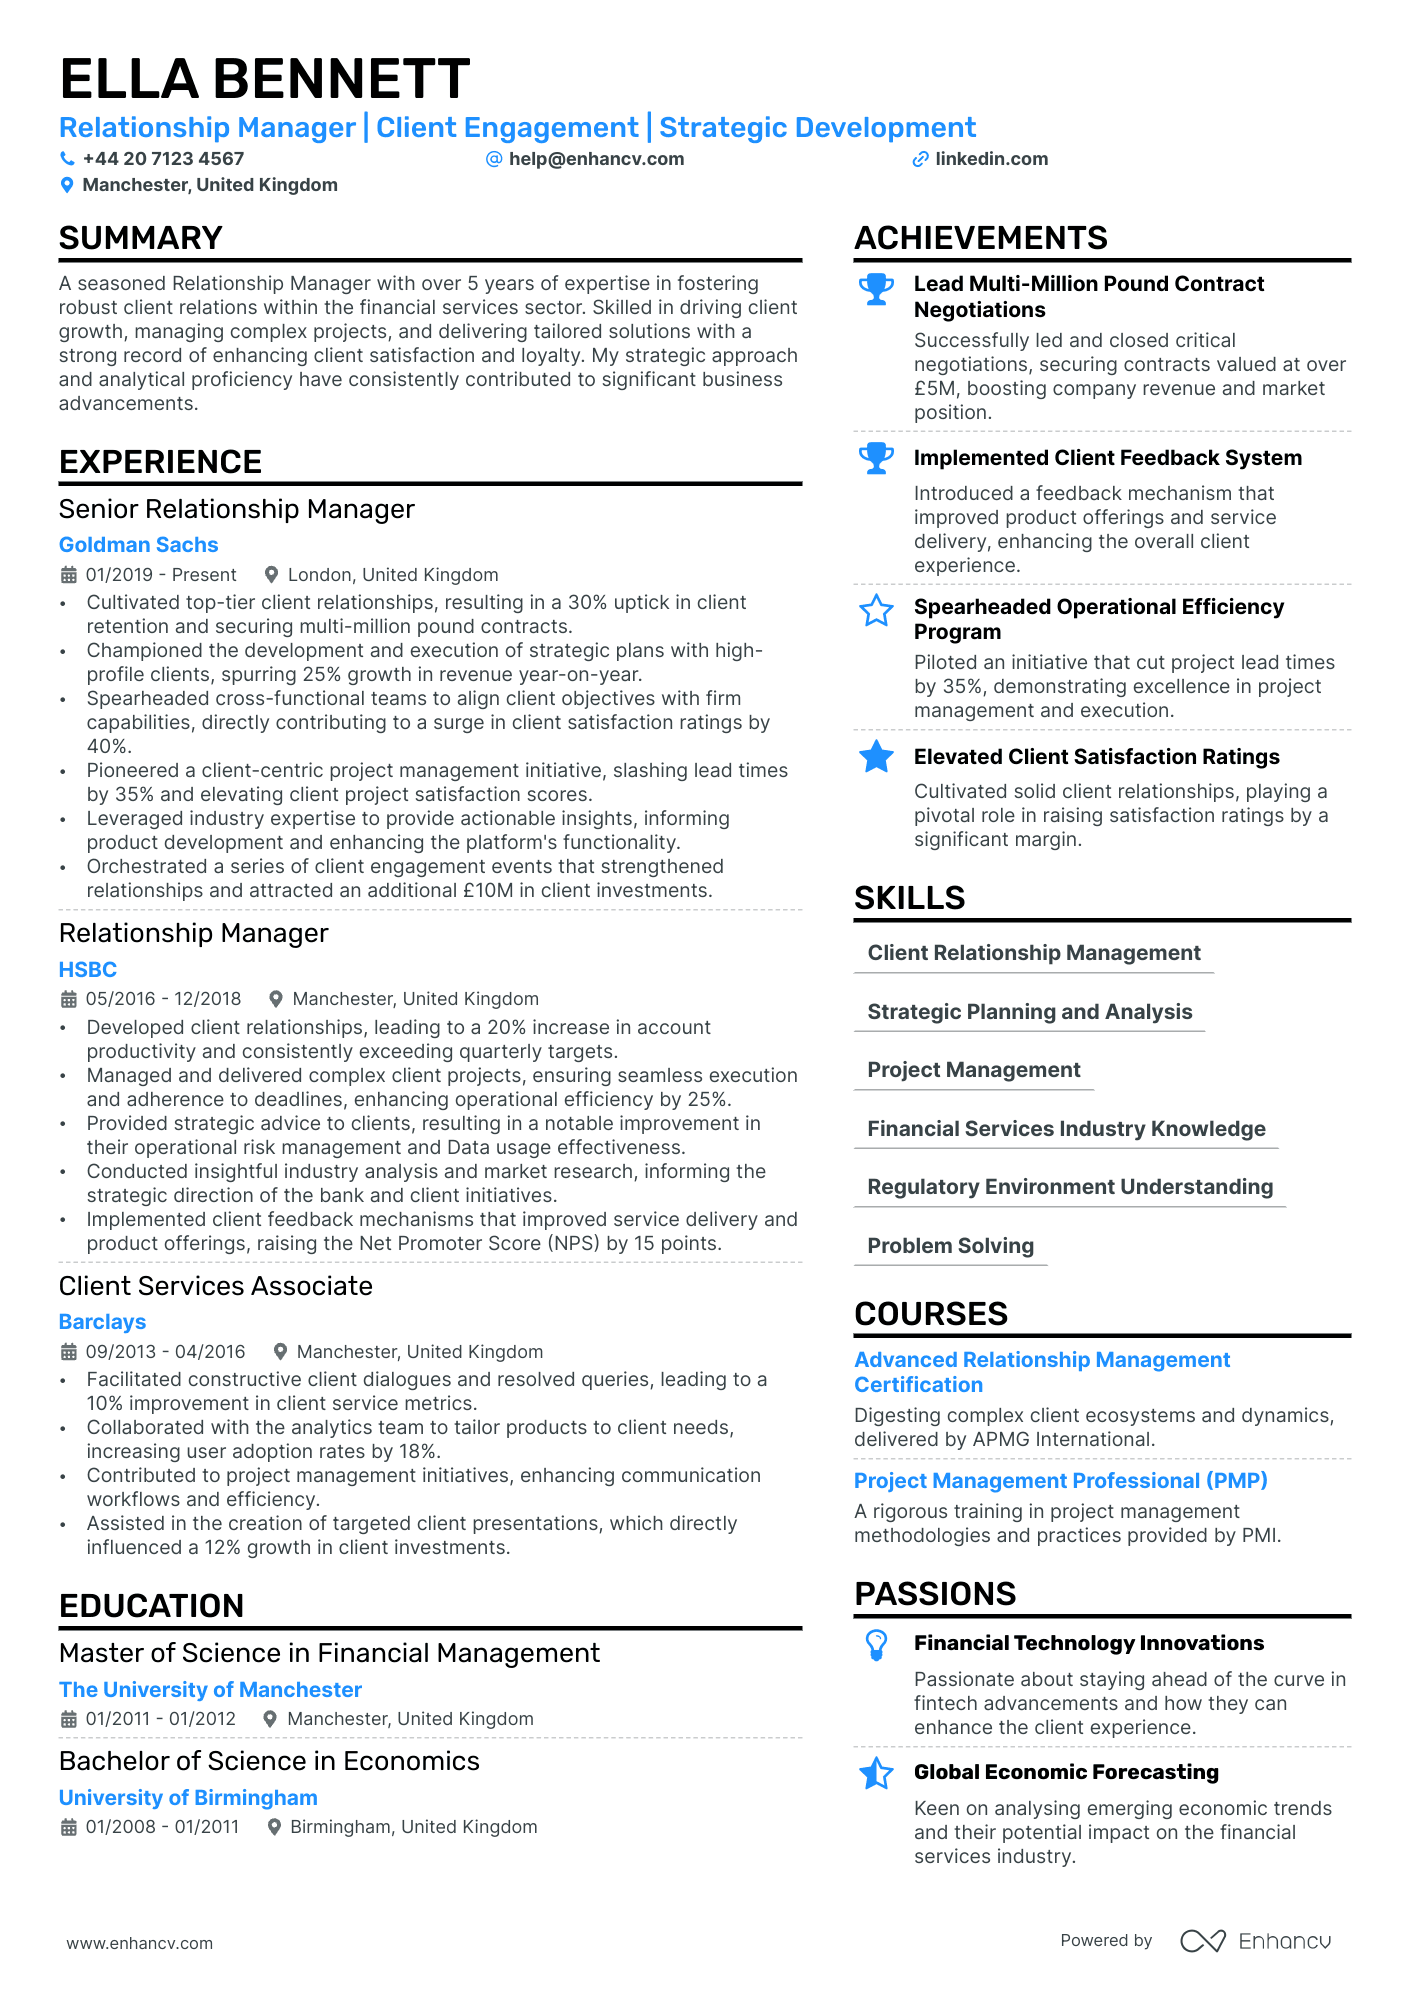 Relationship Manager cv example